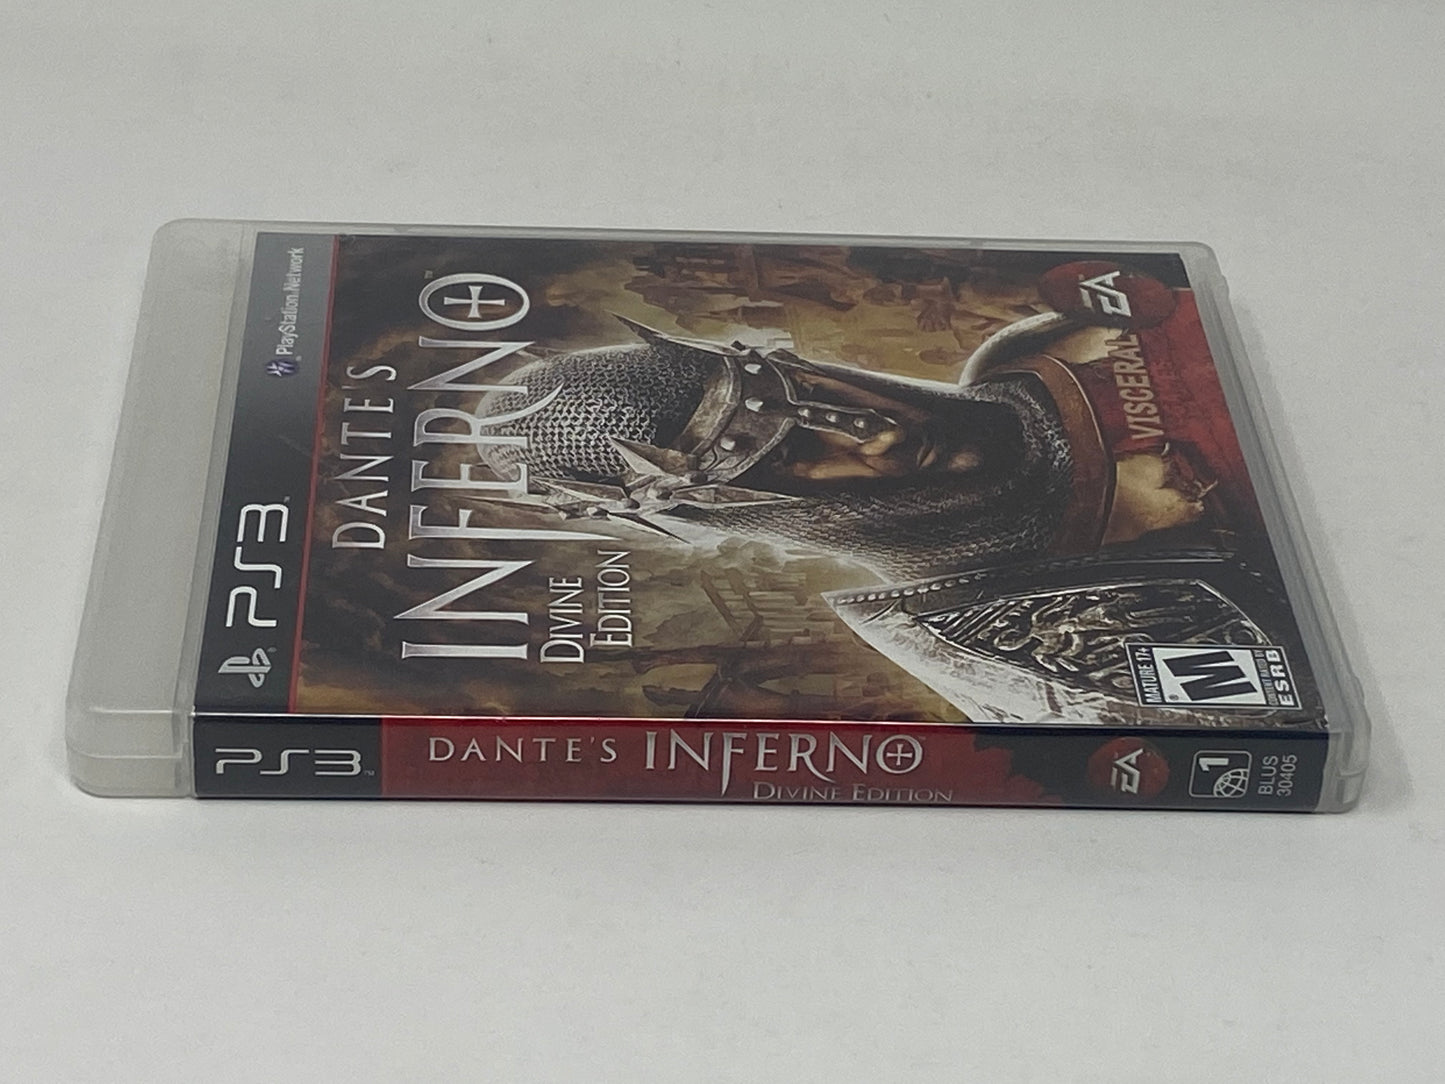 Dante's Inferno Divine Ed PS3 PlayStation 3 AD - (See Pics)